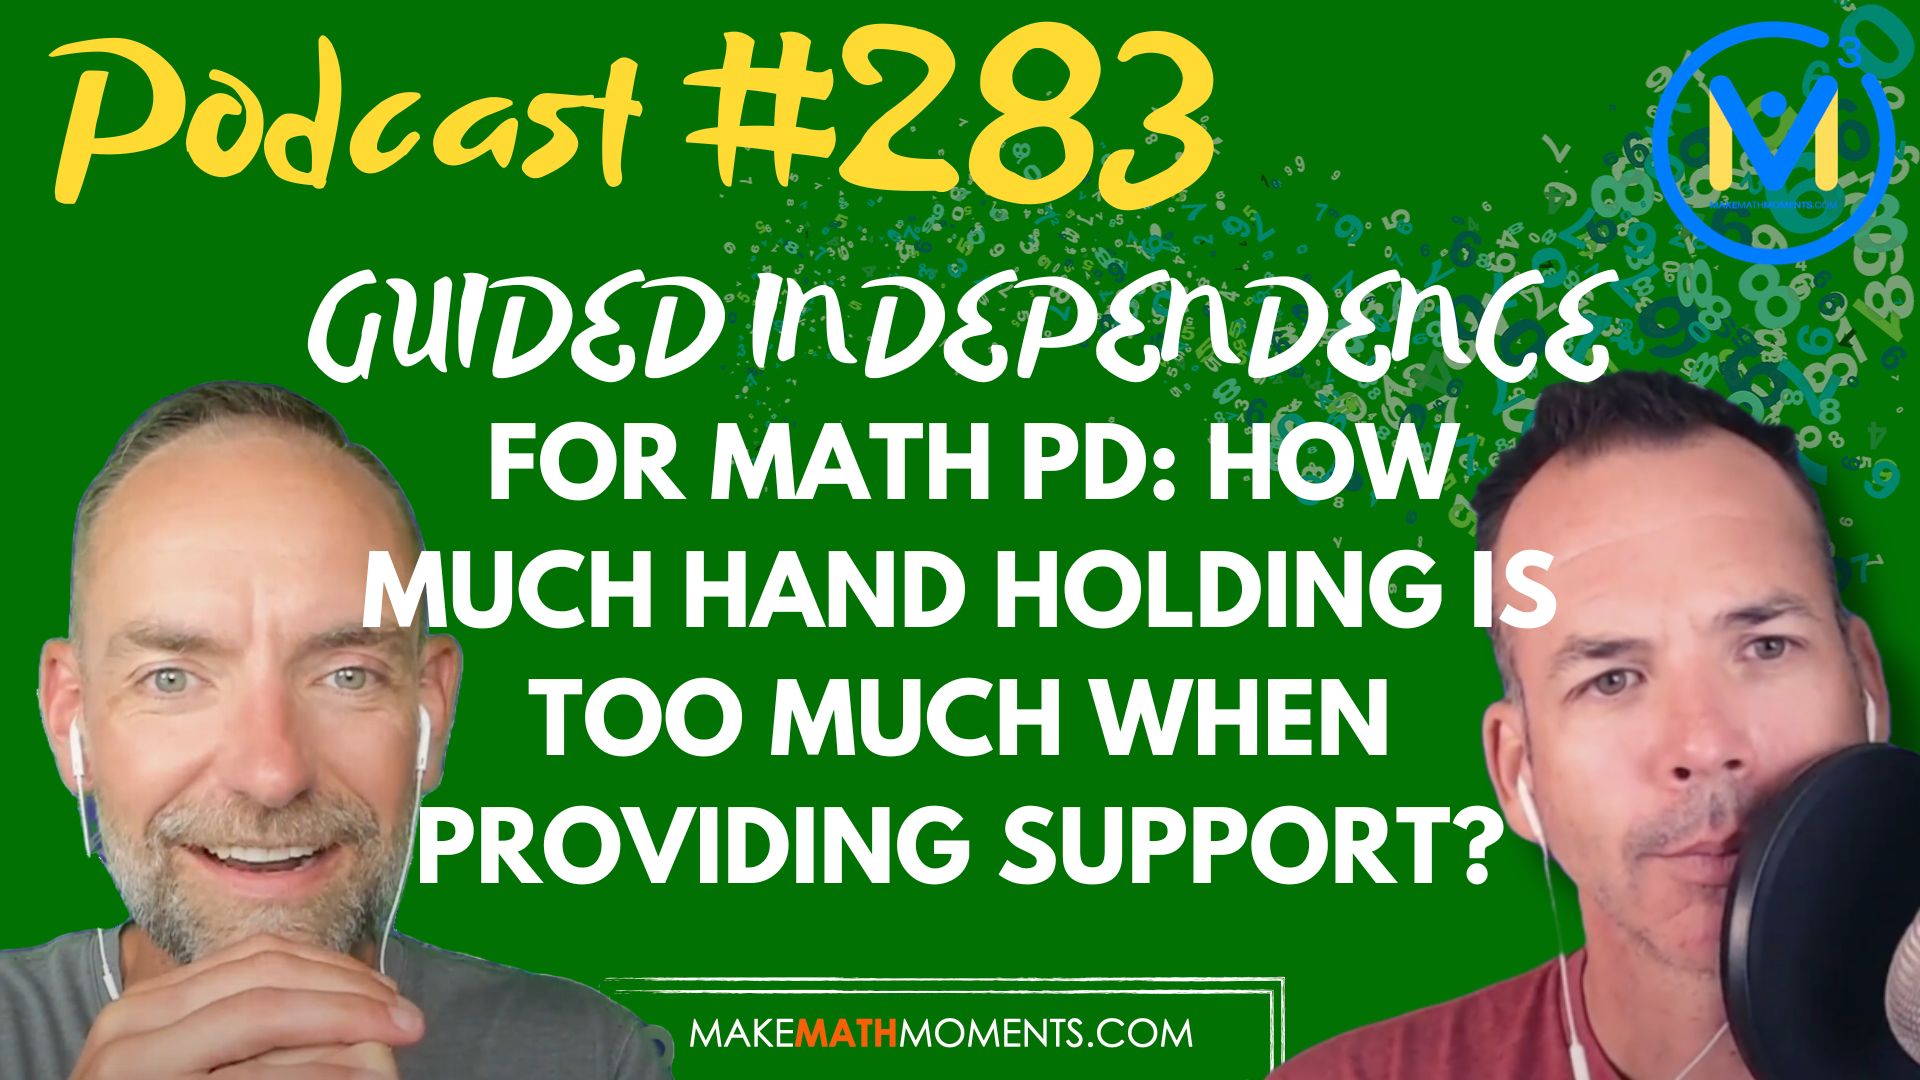 Episode #283: Guided Independence For Math PD: How Much Hand Holding Is Too Much When Providing Support In Math Classes?